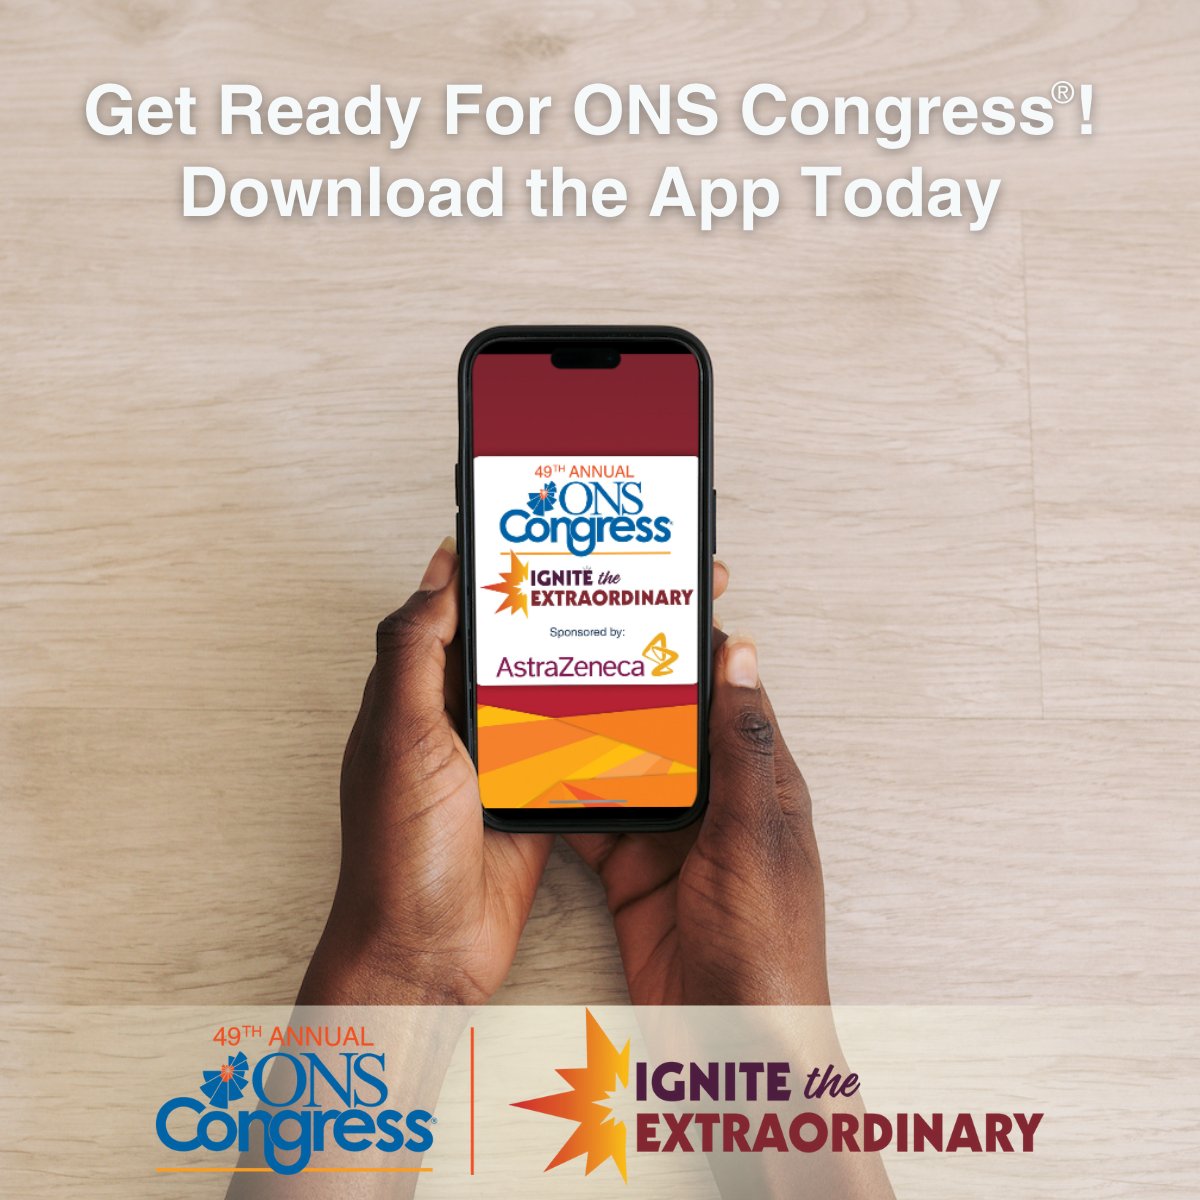 #ONSCongress pro tip: The session schedule can be accessed directly from your ONS Congress app which you can download from the Google Play or Apple App store today.